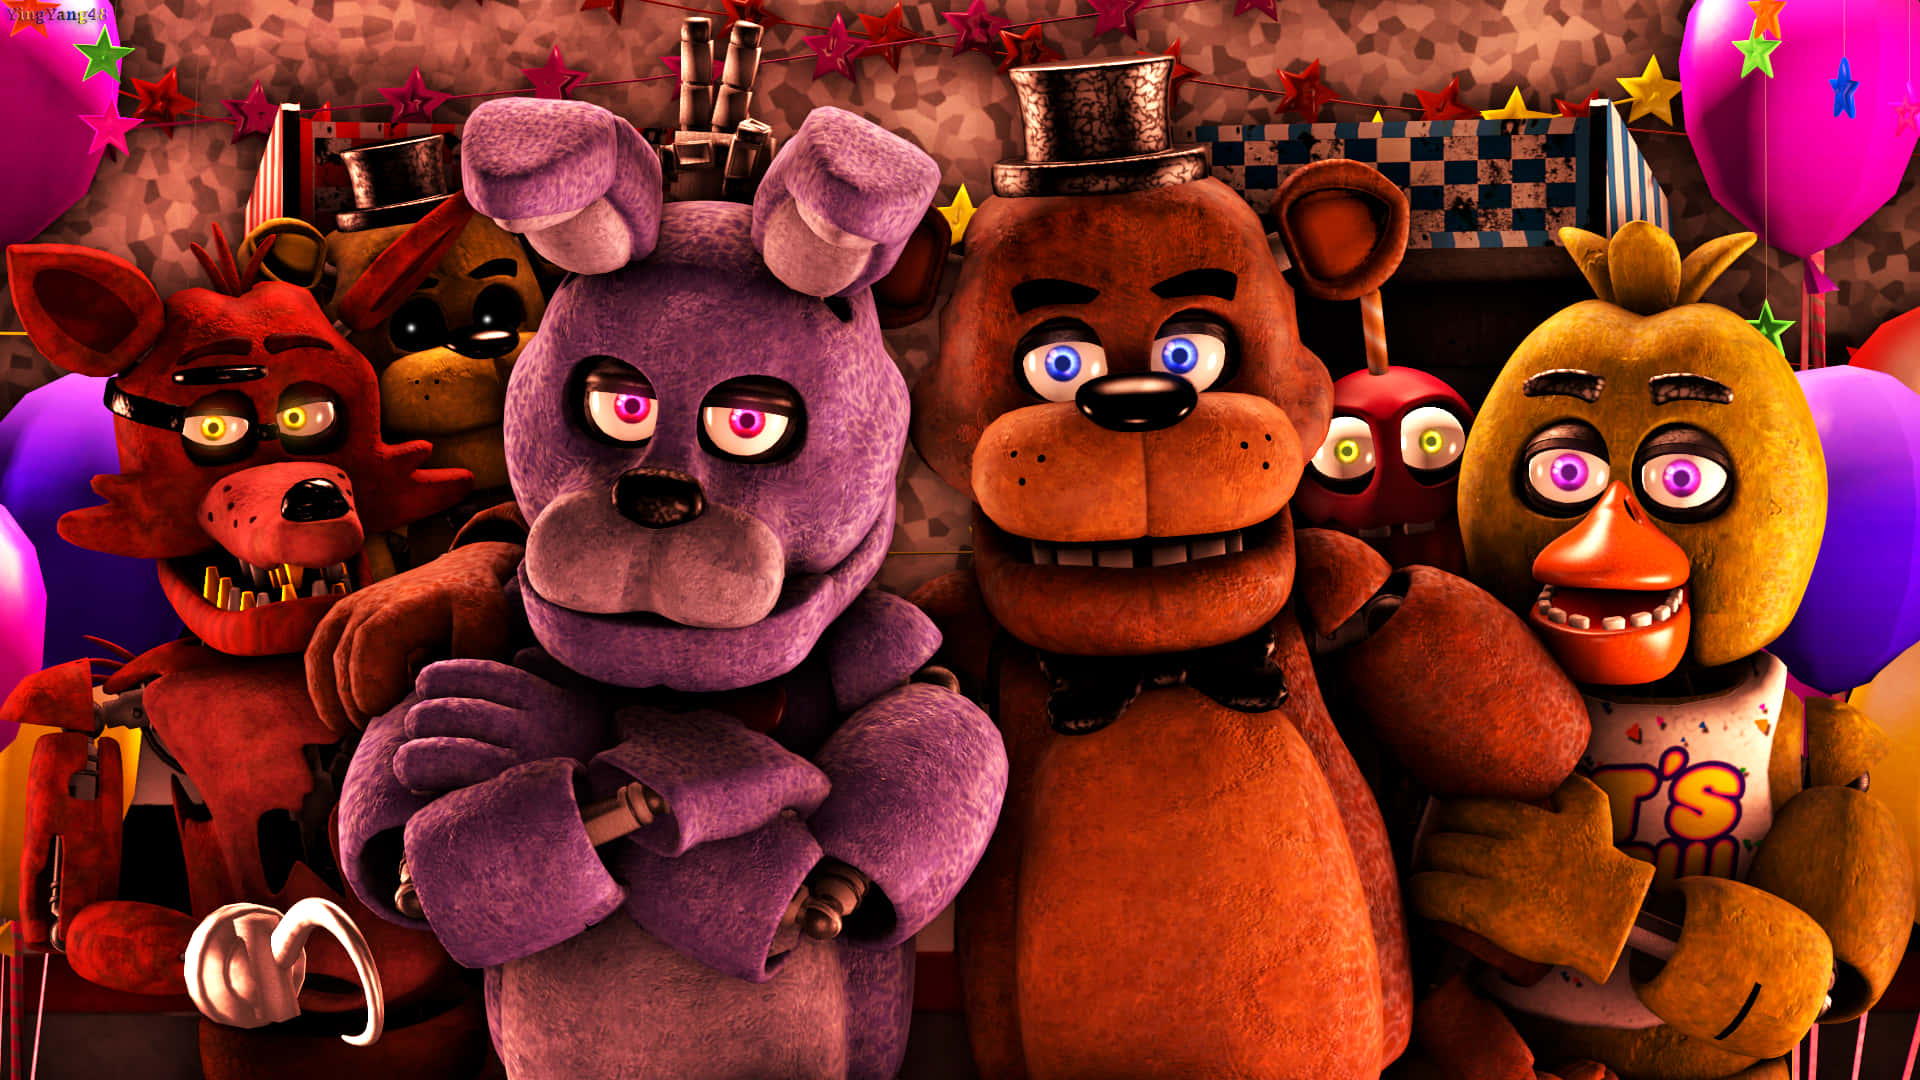 Video Game Five Nights At Freddy's 2 4k Ultra HD Wallpaper